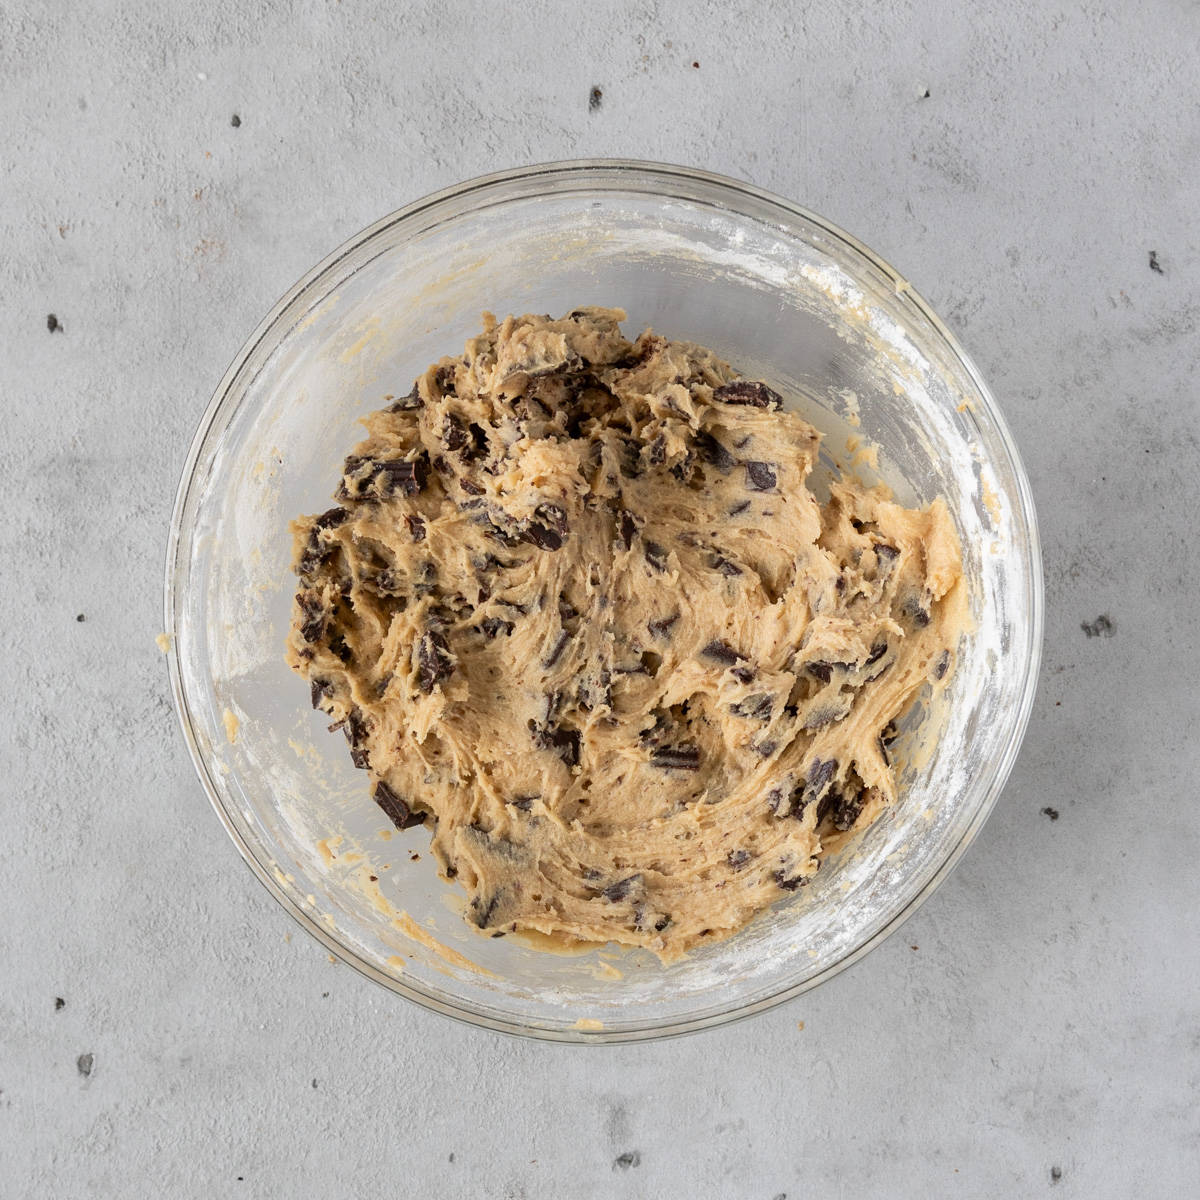 the completed cookie dough in a glass bowl on a grey background.